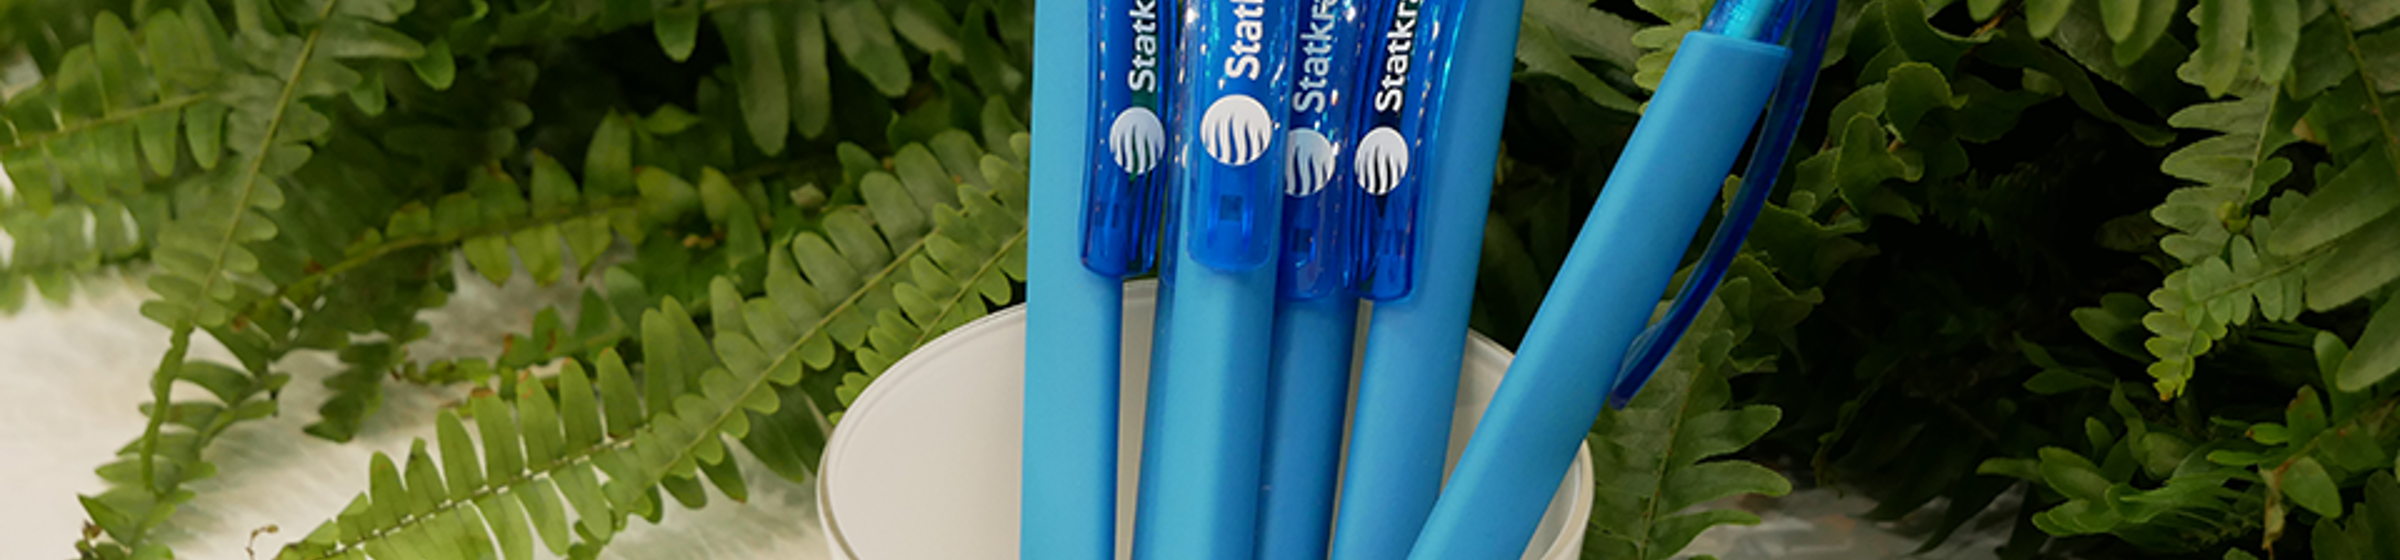 Statkraft branded pens and plants in the background